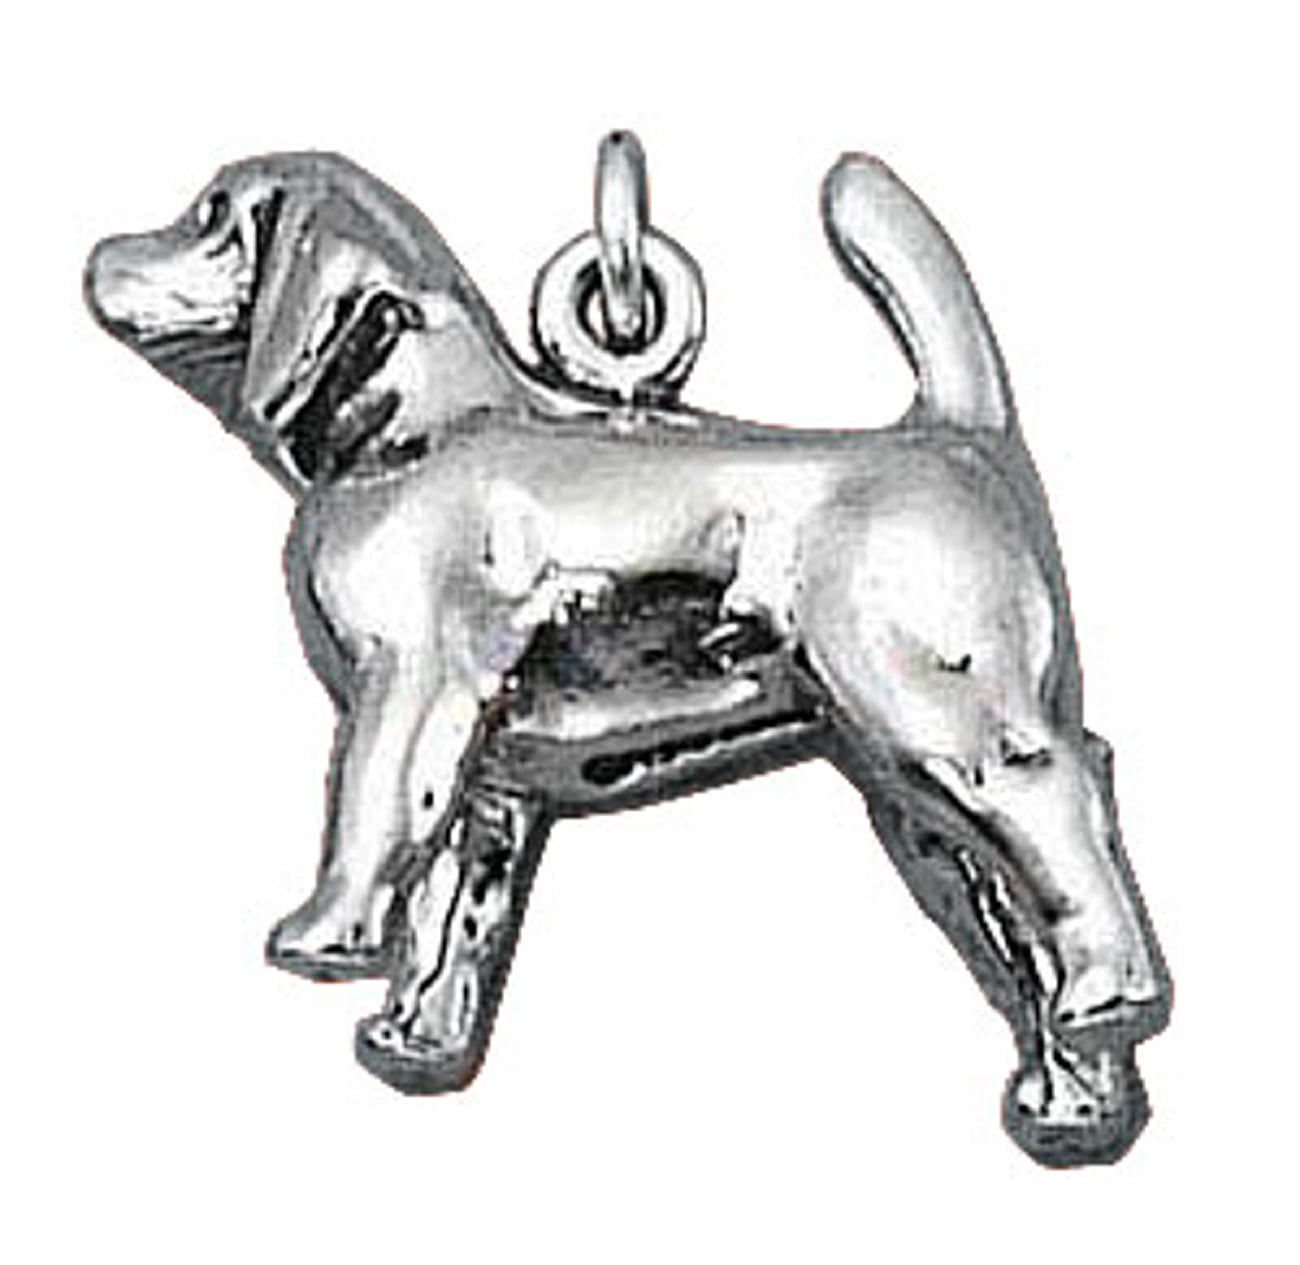 Beagle Dog Breed 3D 925 Solid Sterling Silver Charm Pendant MADE IN USA 